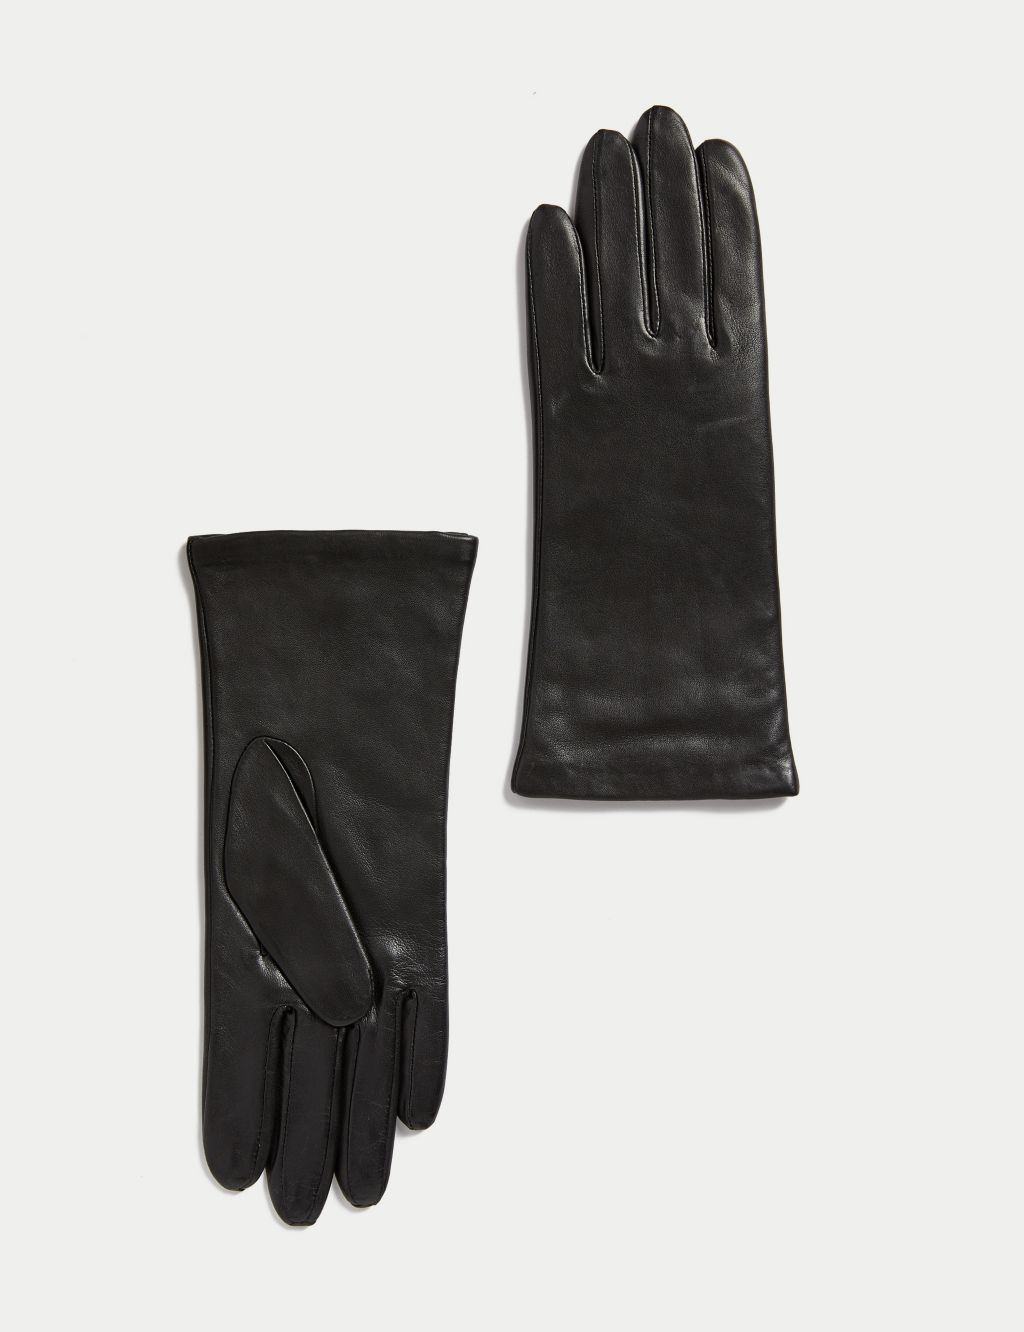 Leather Cashmere Lined Gloves image 1